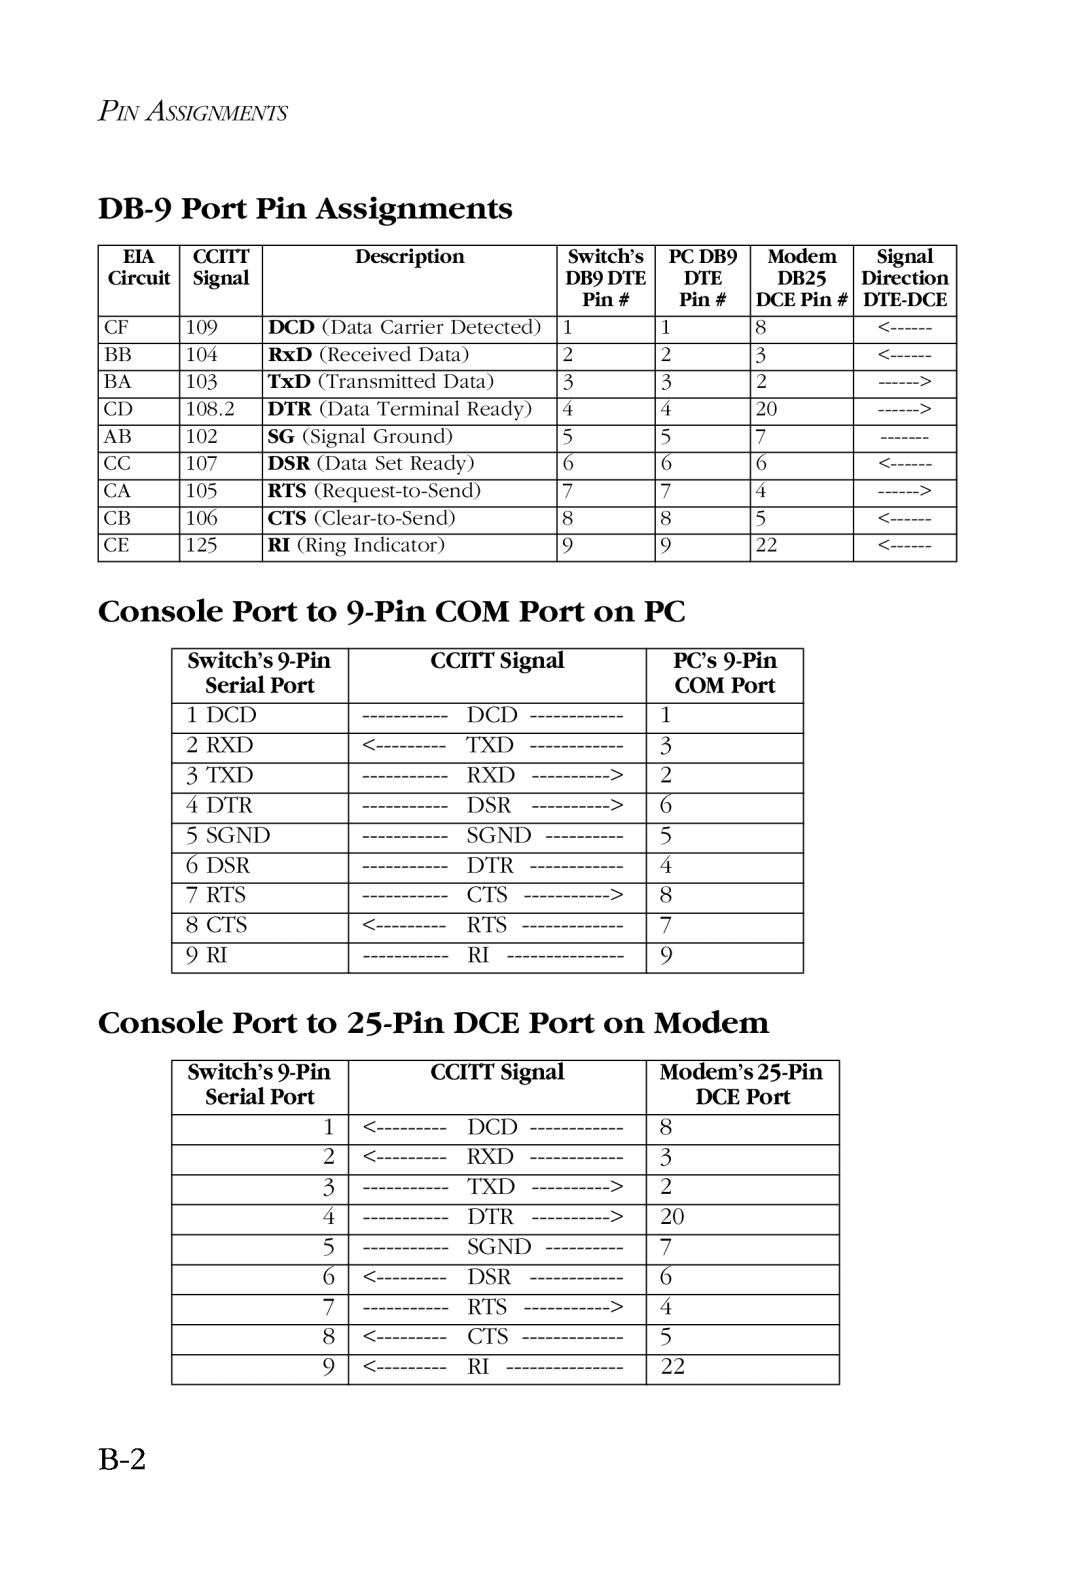 SMC Networks SMC6924VF manual DB-9 Port Pin Assignments, Console Port to 9-Pin COM Port on PC 